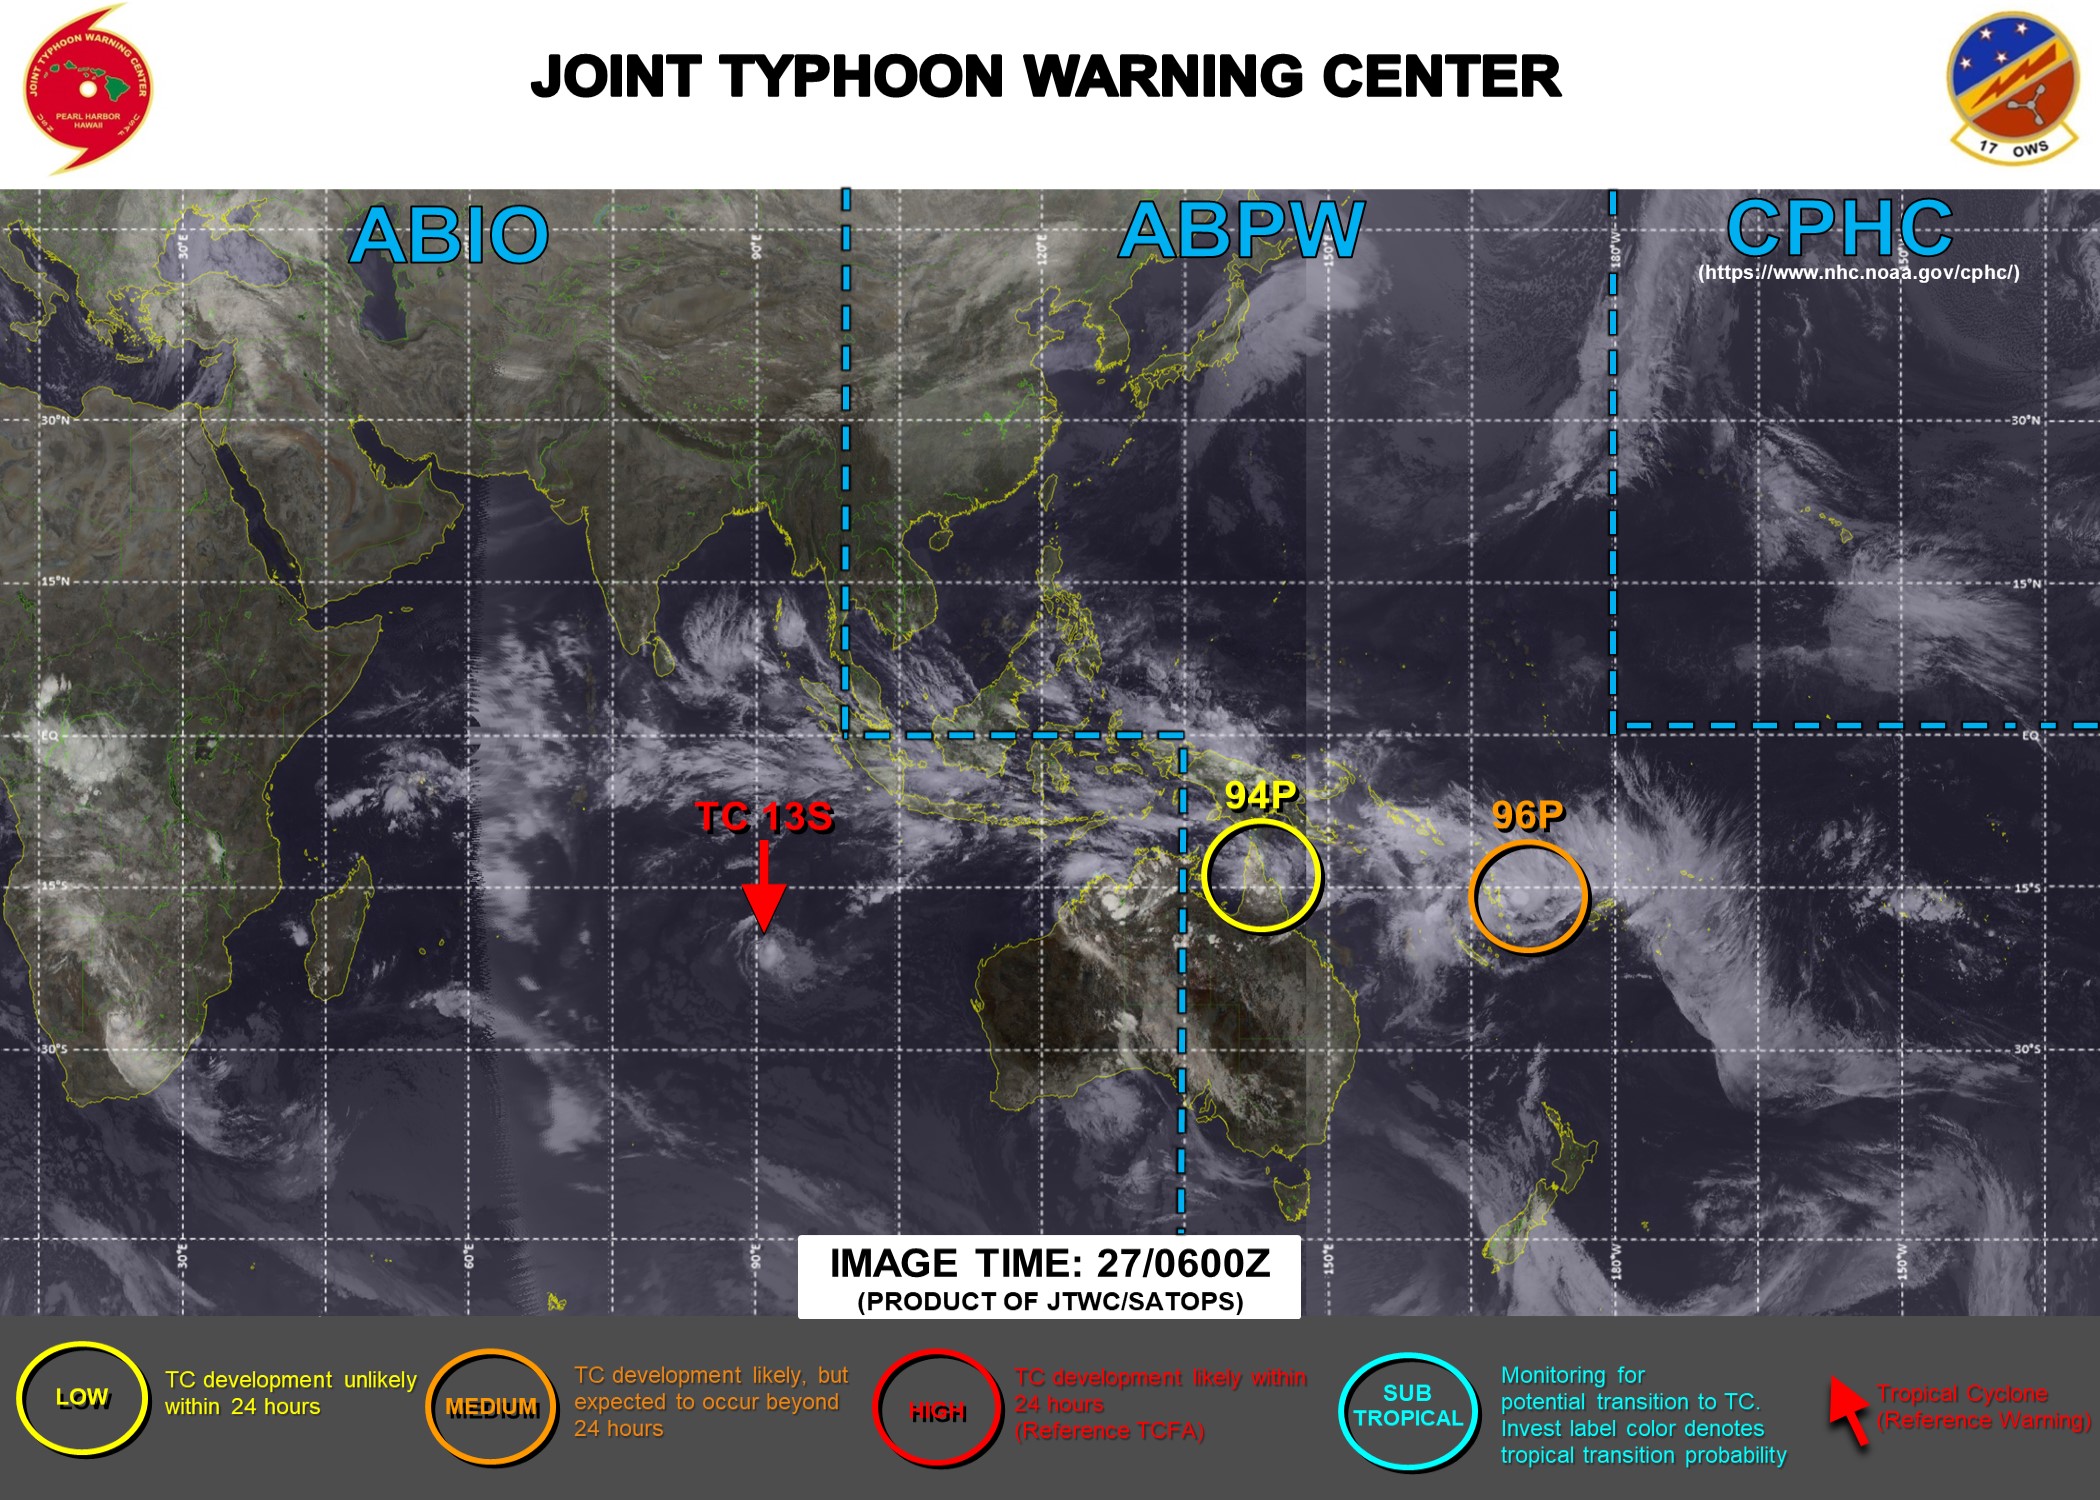 JTWC HAS BEEN ISSUING 12HOURLY WARNINGS AND 3 HOURLY SATELLITE BULLETINS FOR 13S(NONAME). INVEST 96P HAS BEEN UP-GRADED TO MEDIUM FOR THE NEXT 24HOURS.